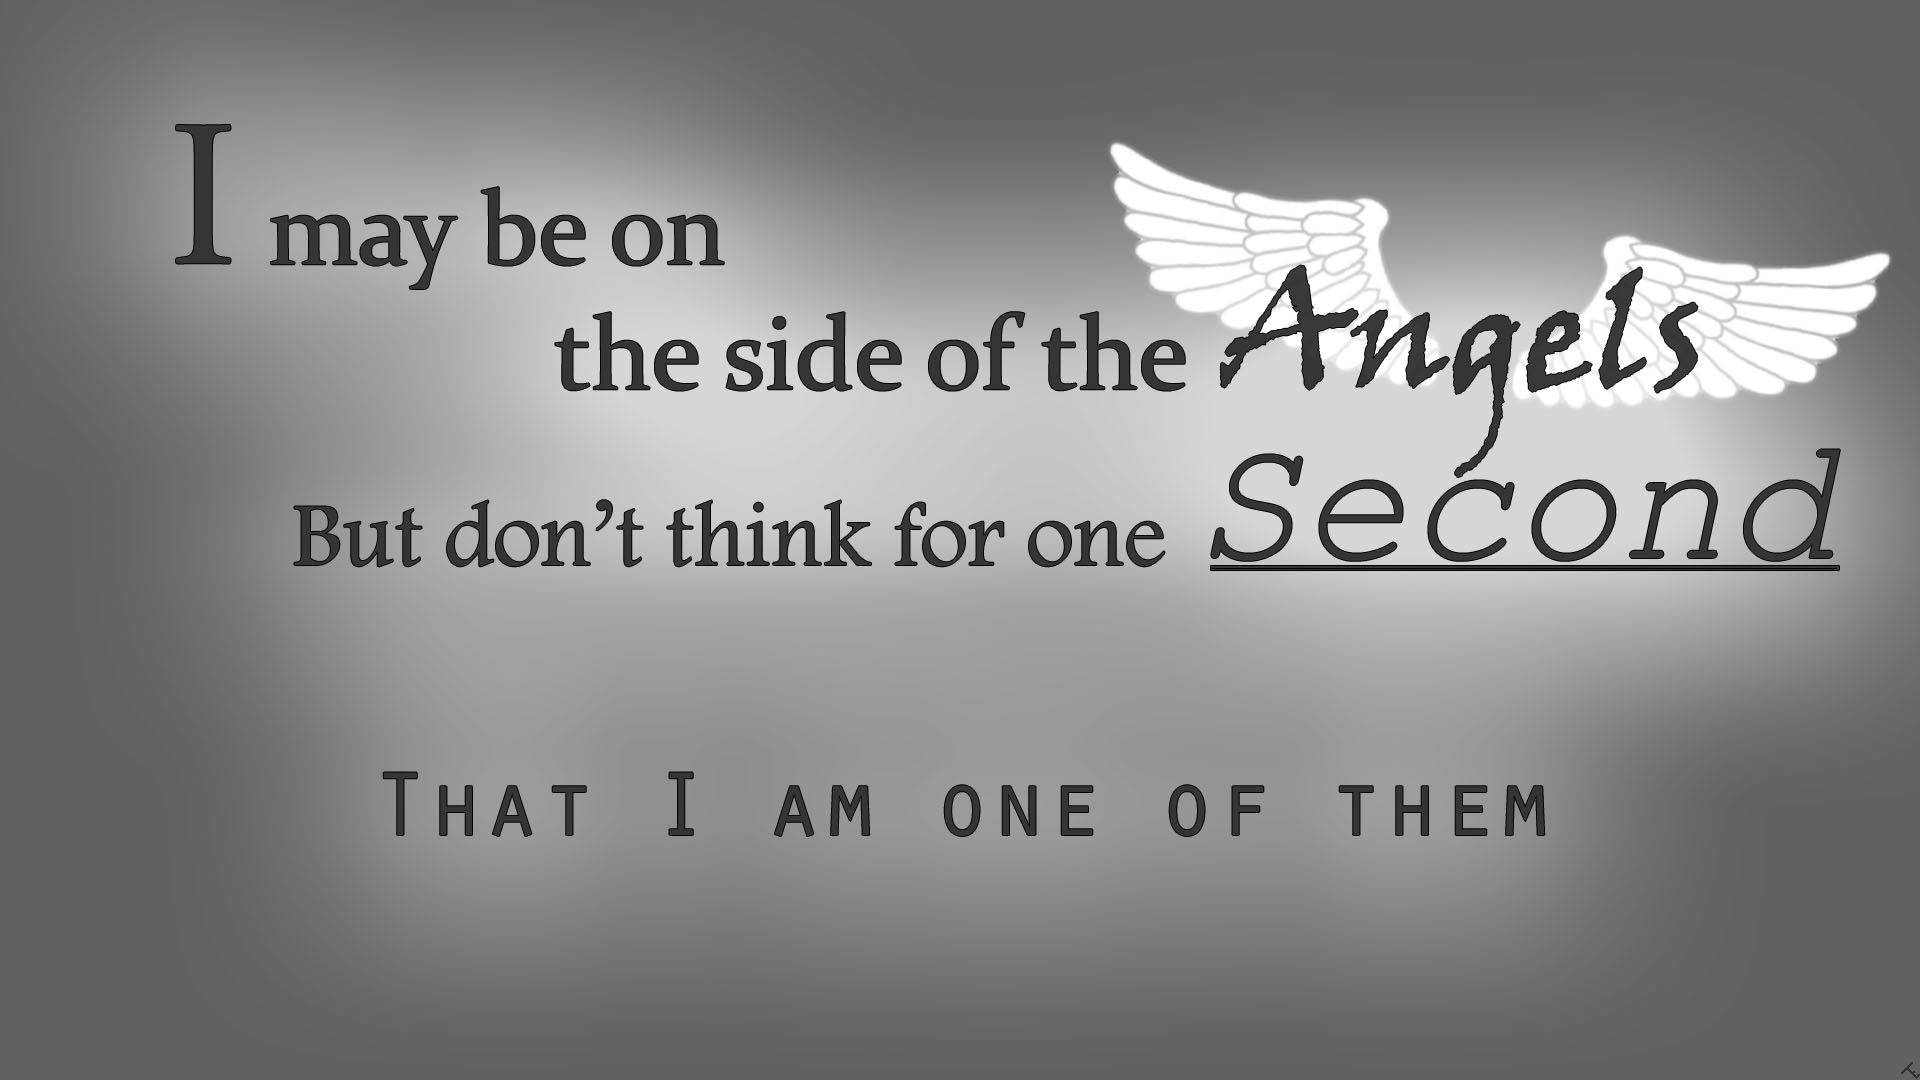 Sherlock quote I made into a wallpaper 1920 x 1080   Reddit Forum